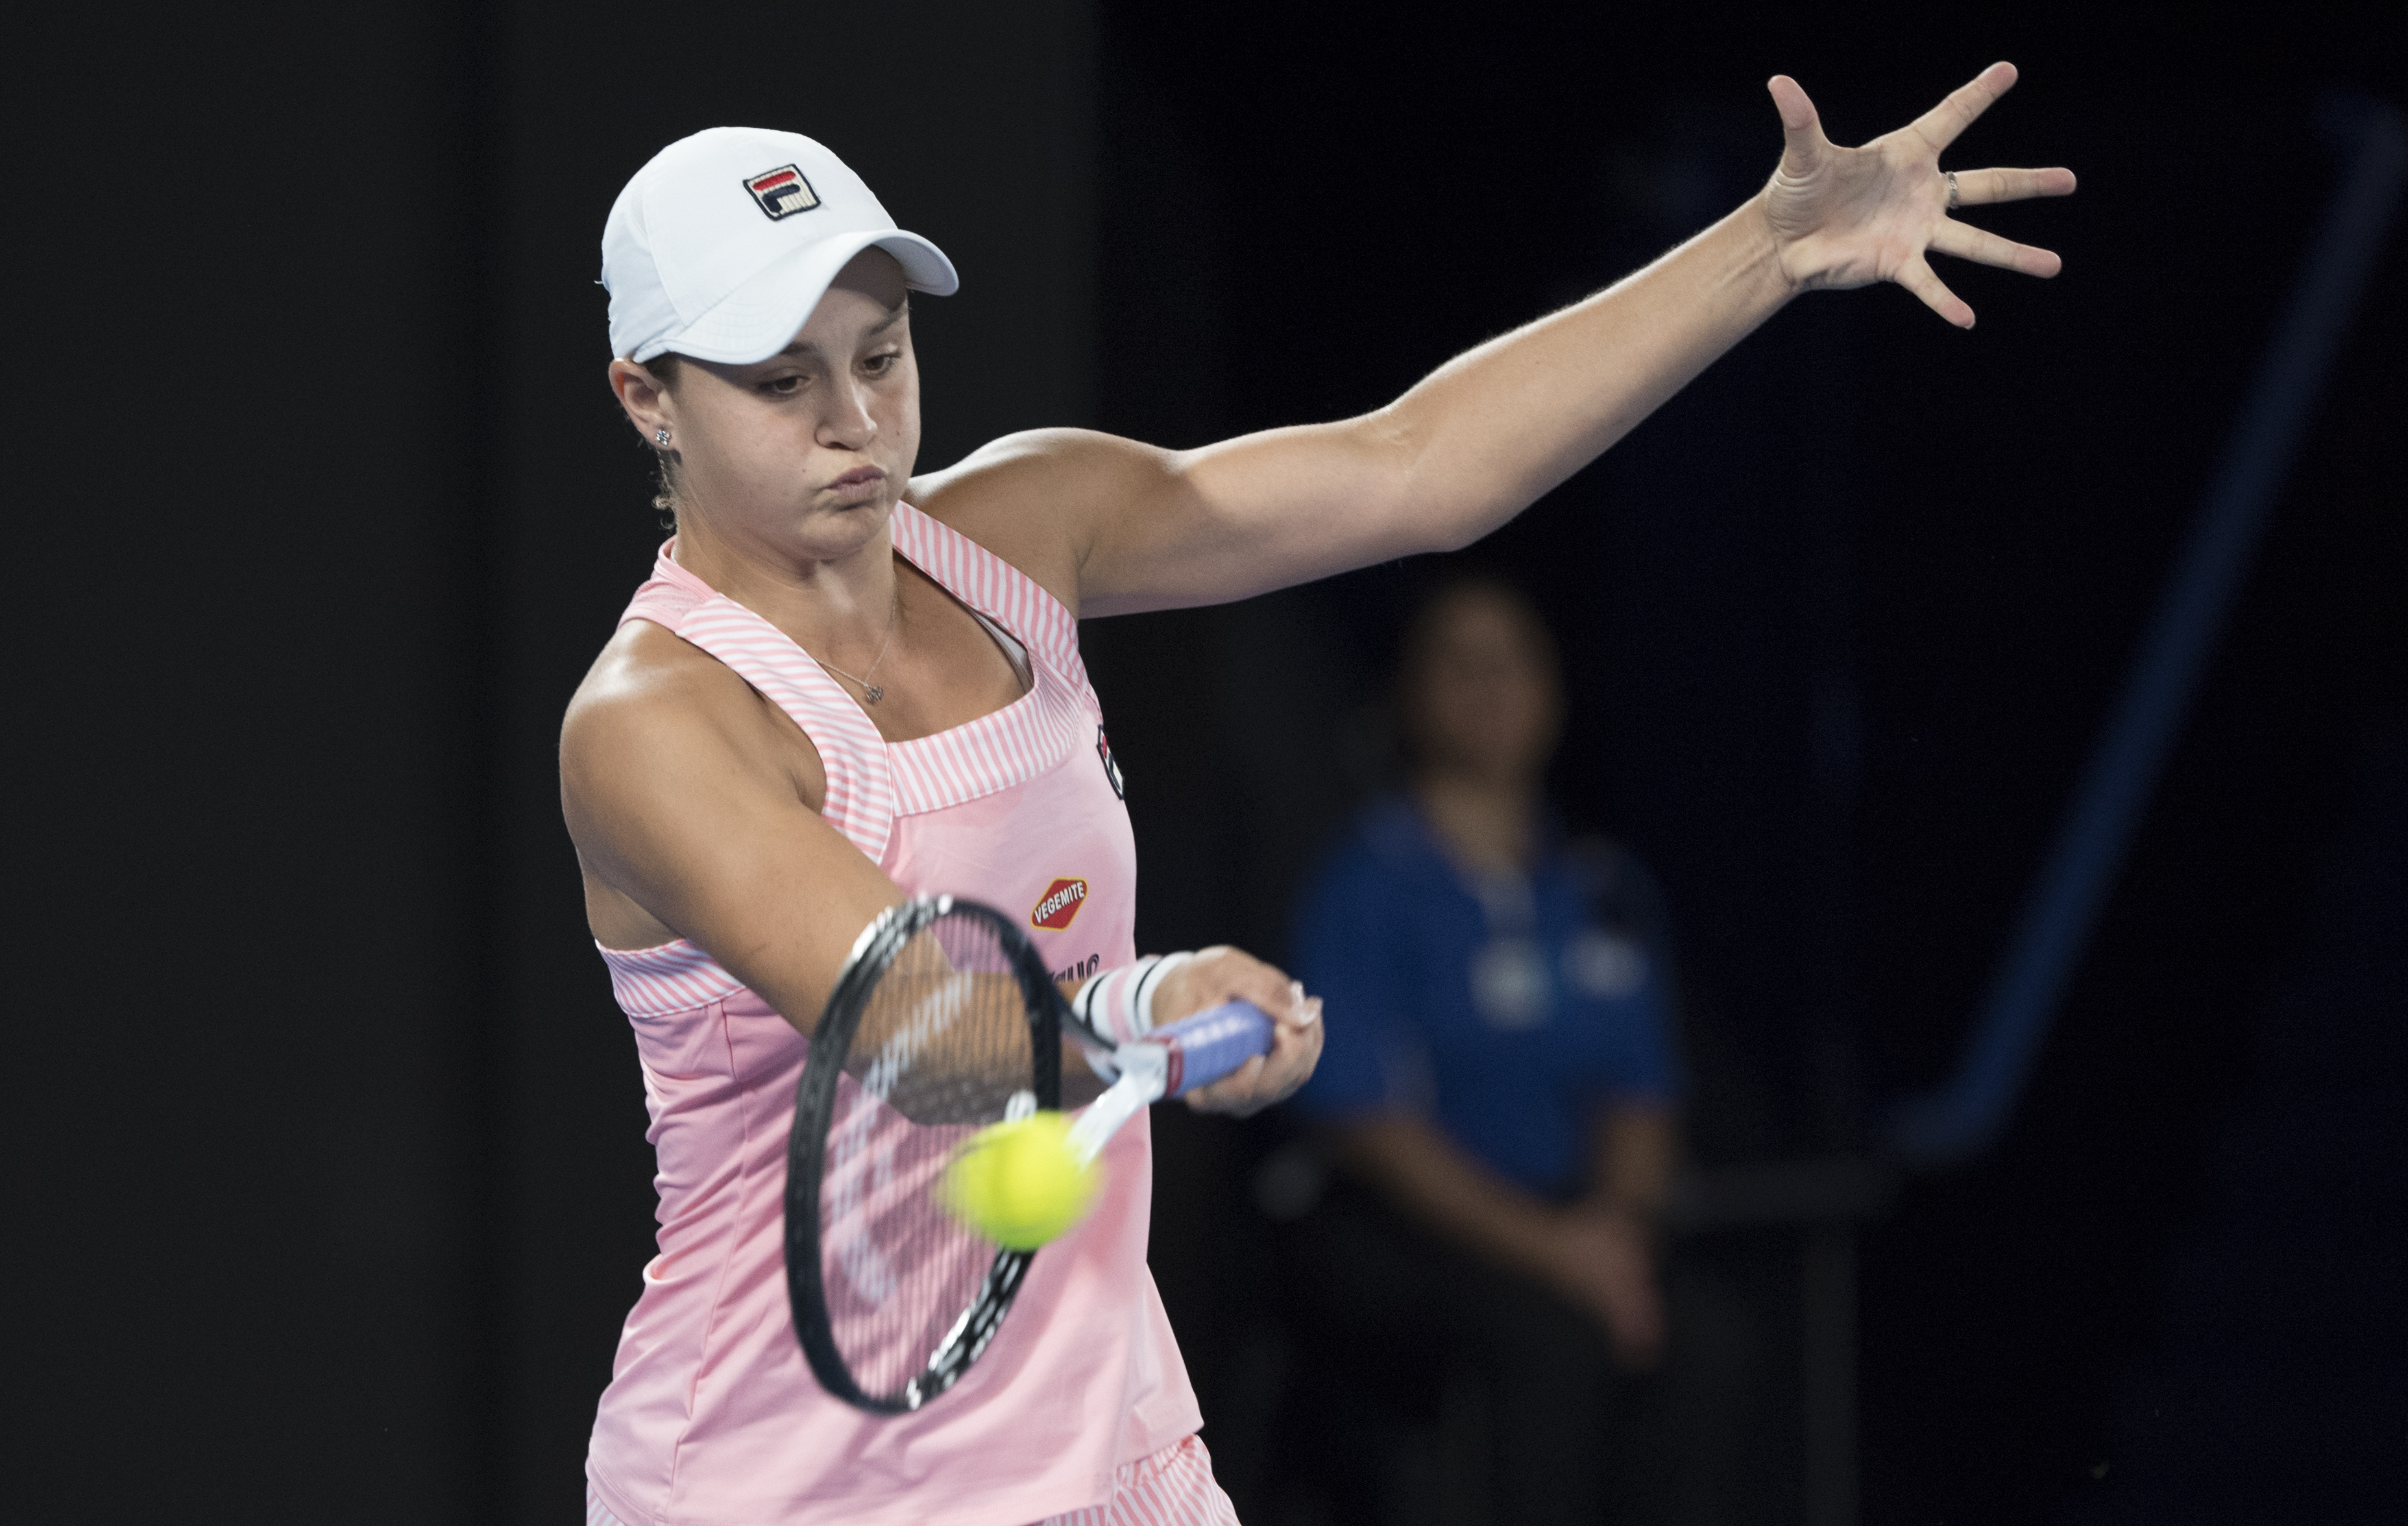 Sports News Roundup: Ashleigh Barty advances in Stuttgart; Kirill Kaprizov (2 goals) leads Wild past Kings and more